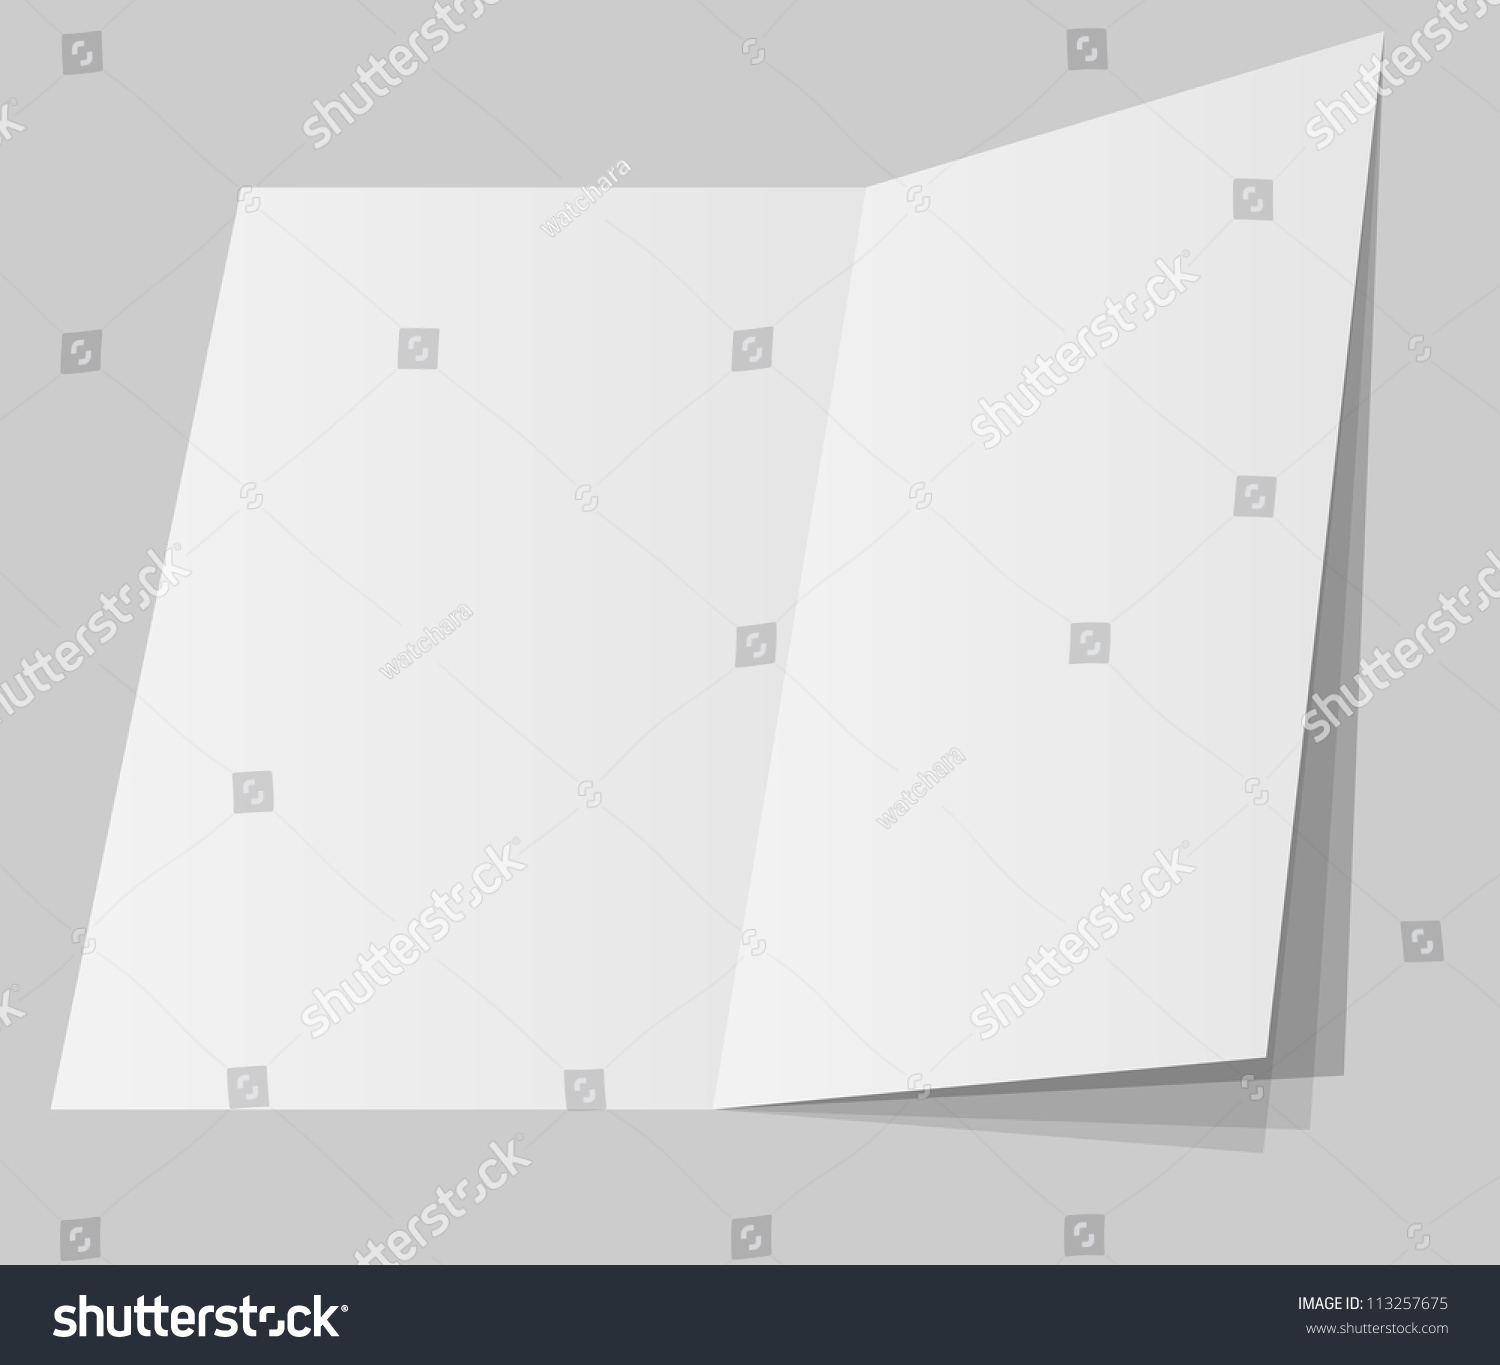 Blank Sheet Paper Paper Page Curl Stock Vector 113257675 - Shutterstock